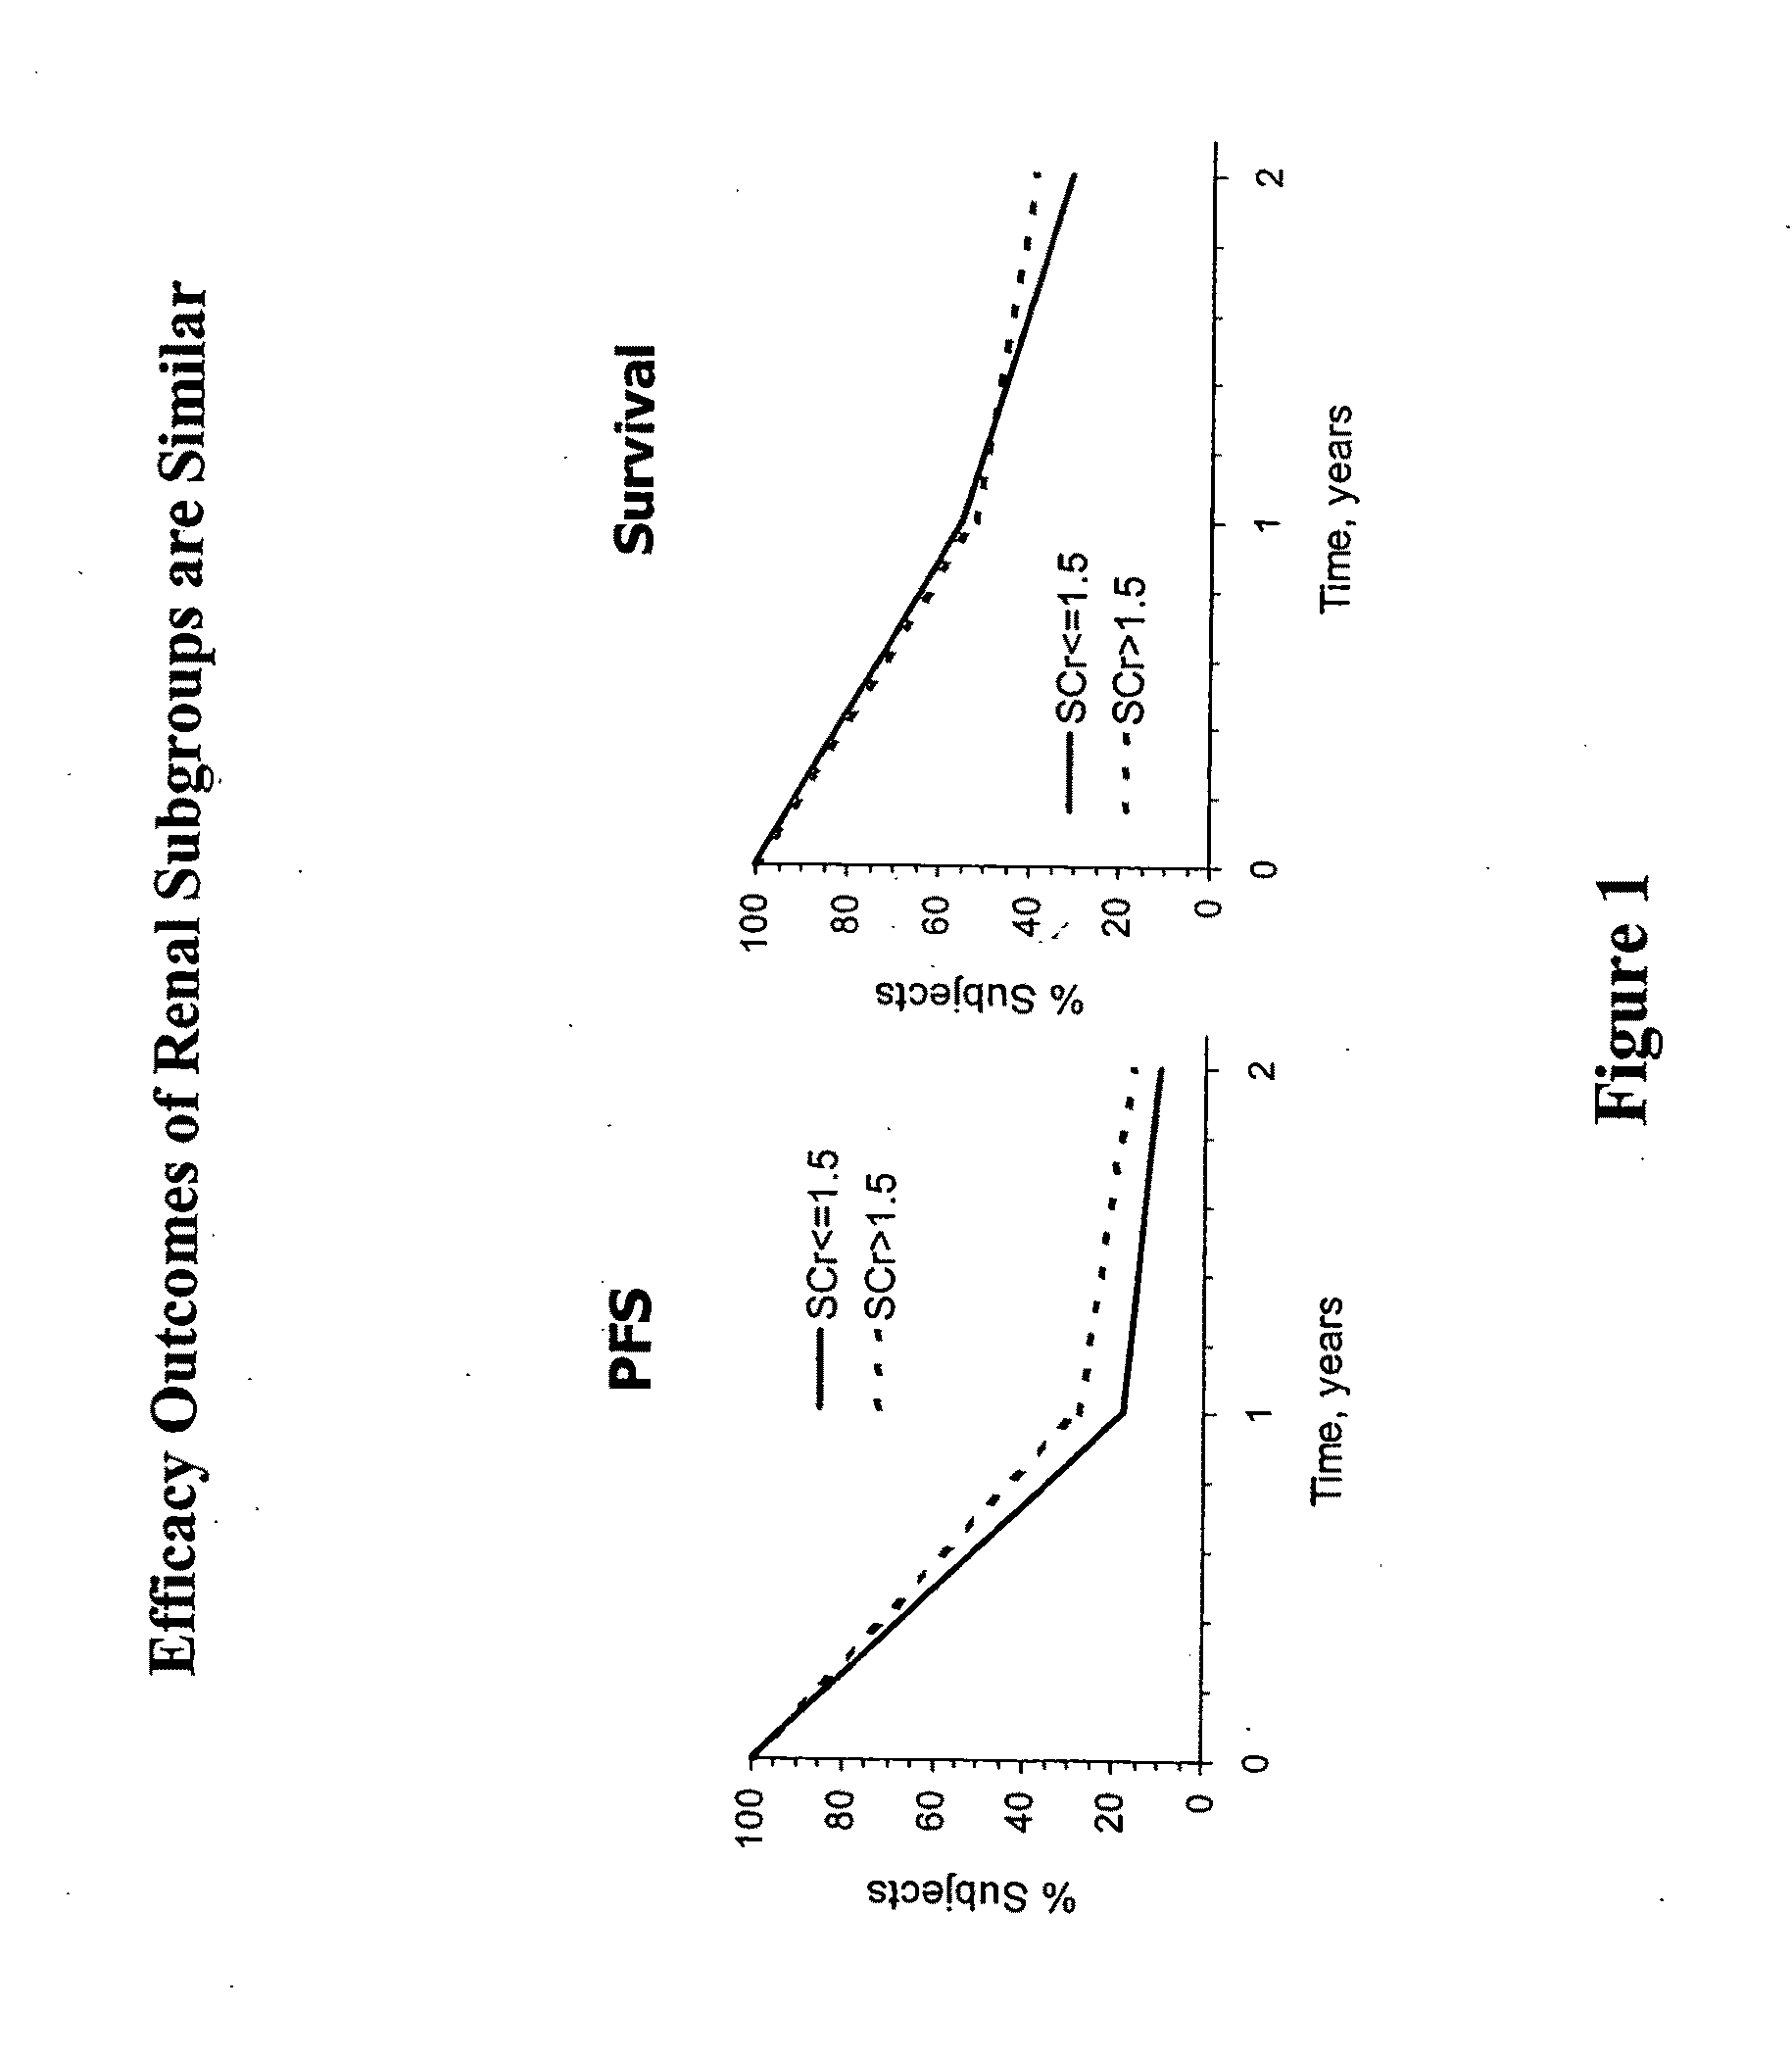 Methods for treating renal cell carcinoma